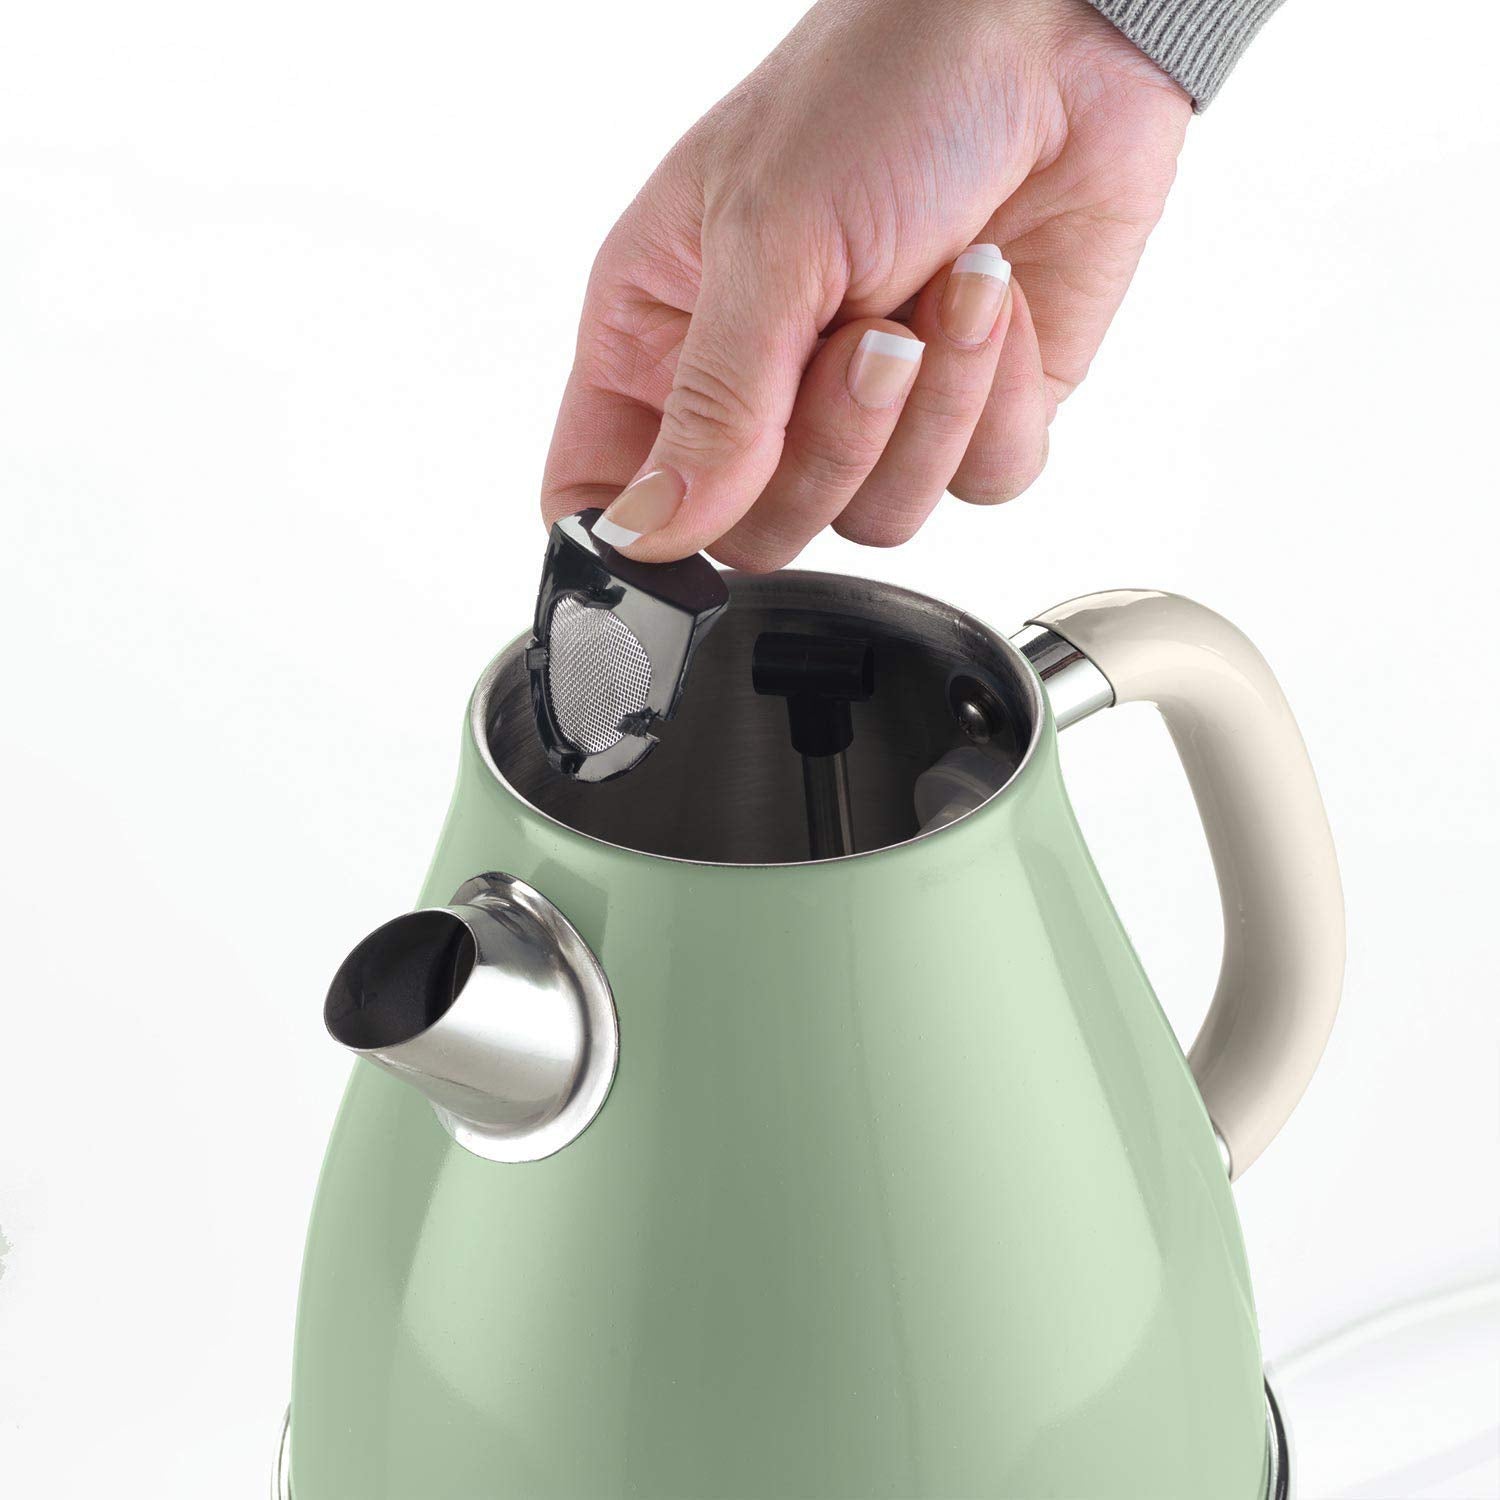 Ariete 2869 Vintage Electric Kettle, Stainless Steel, 1.7 L, Auto Switch Off, 2000 W, for Water, Tea and Herbal Teas, Pastel Green - Mahajan Electronics Online